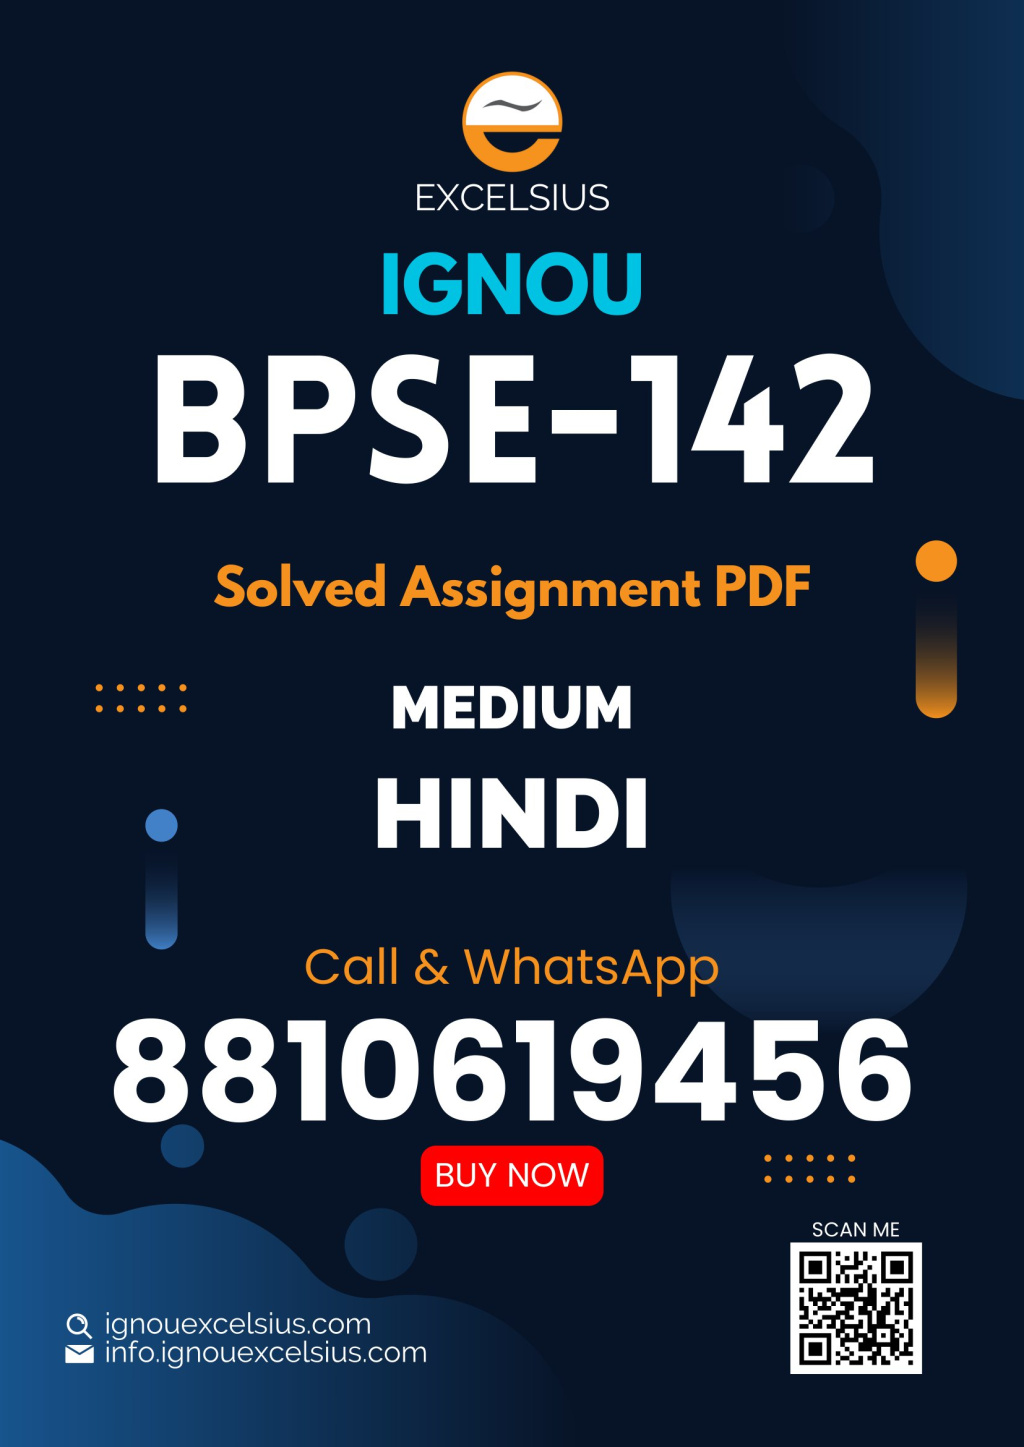 IGNOU BPSE-142 - India’s Foreign Policy in a Changing World, Latest Solved Assignment-July 2022 – January 2023